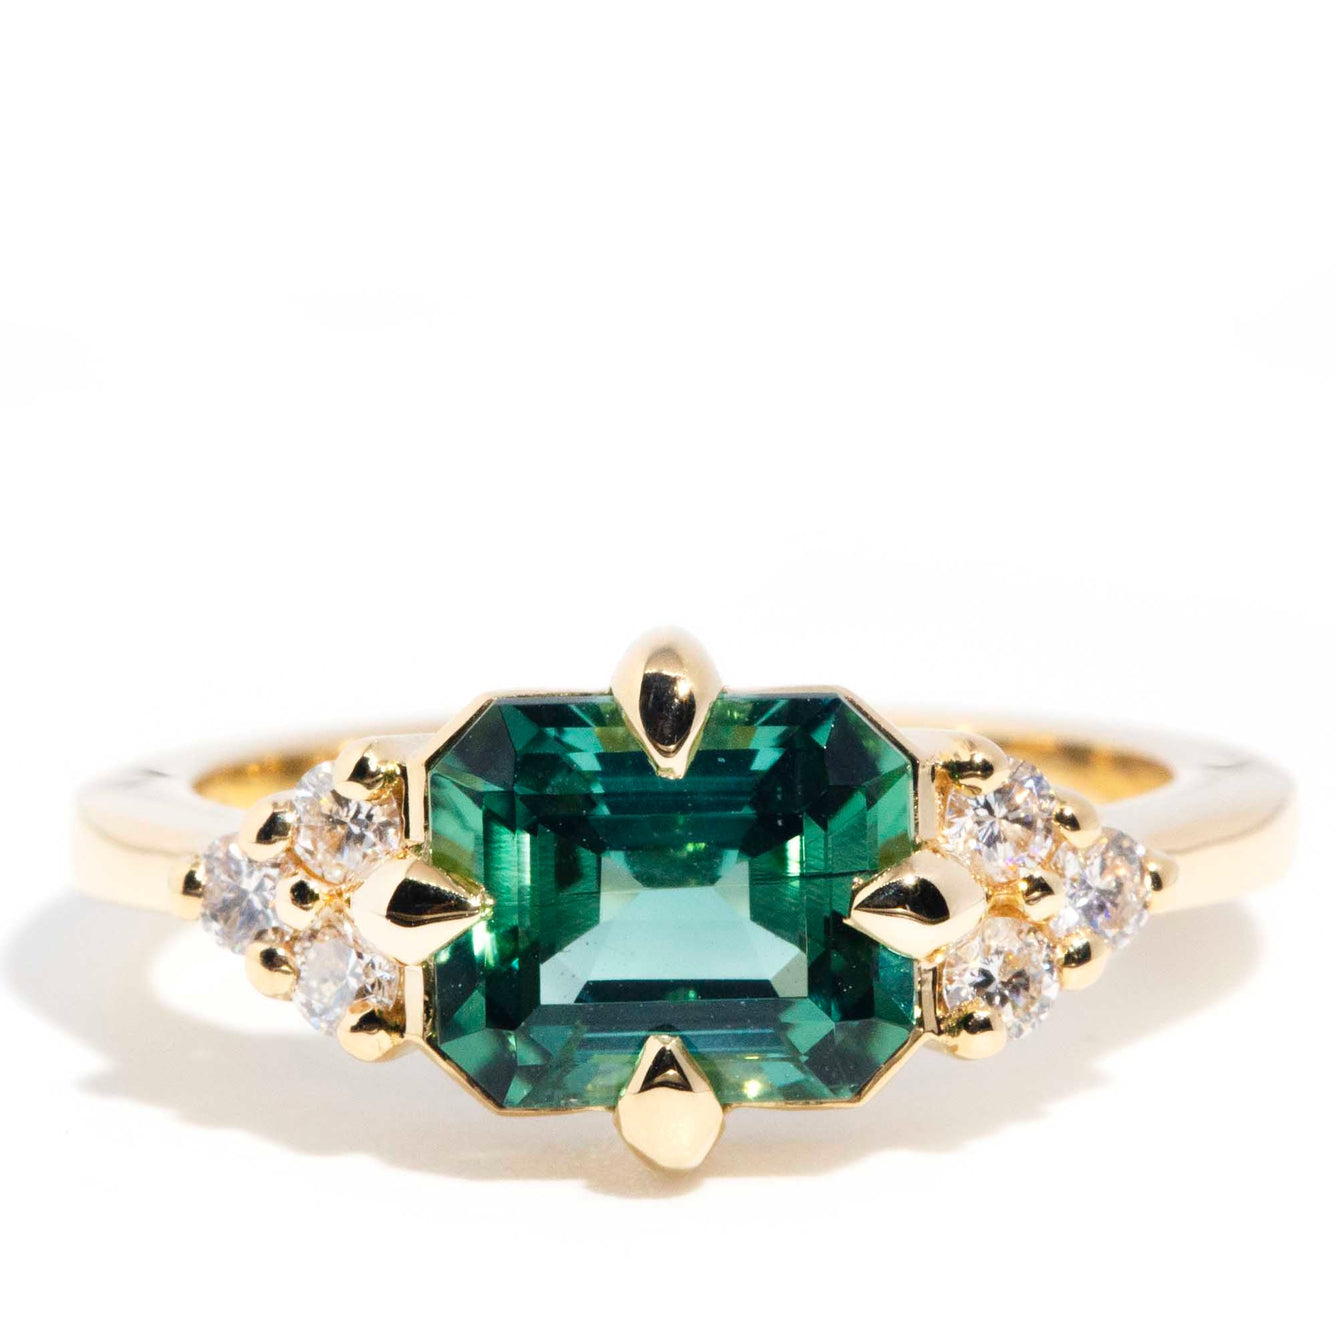 Angelita 2.05ct Teal Tourmaline & Diamond Contemporary 18ct Gold Ring* GTG Rings Imperial Jewellery Imperial Jewellery - Hamilton